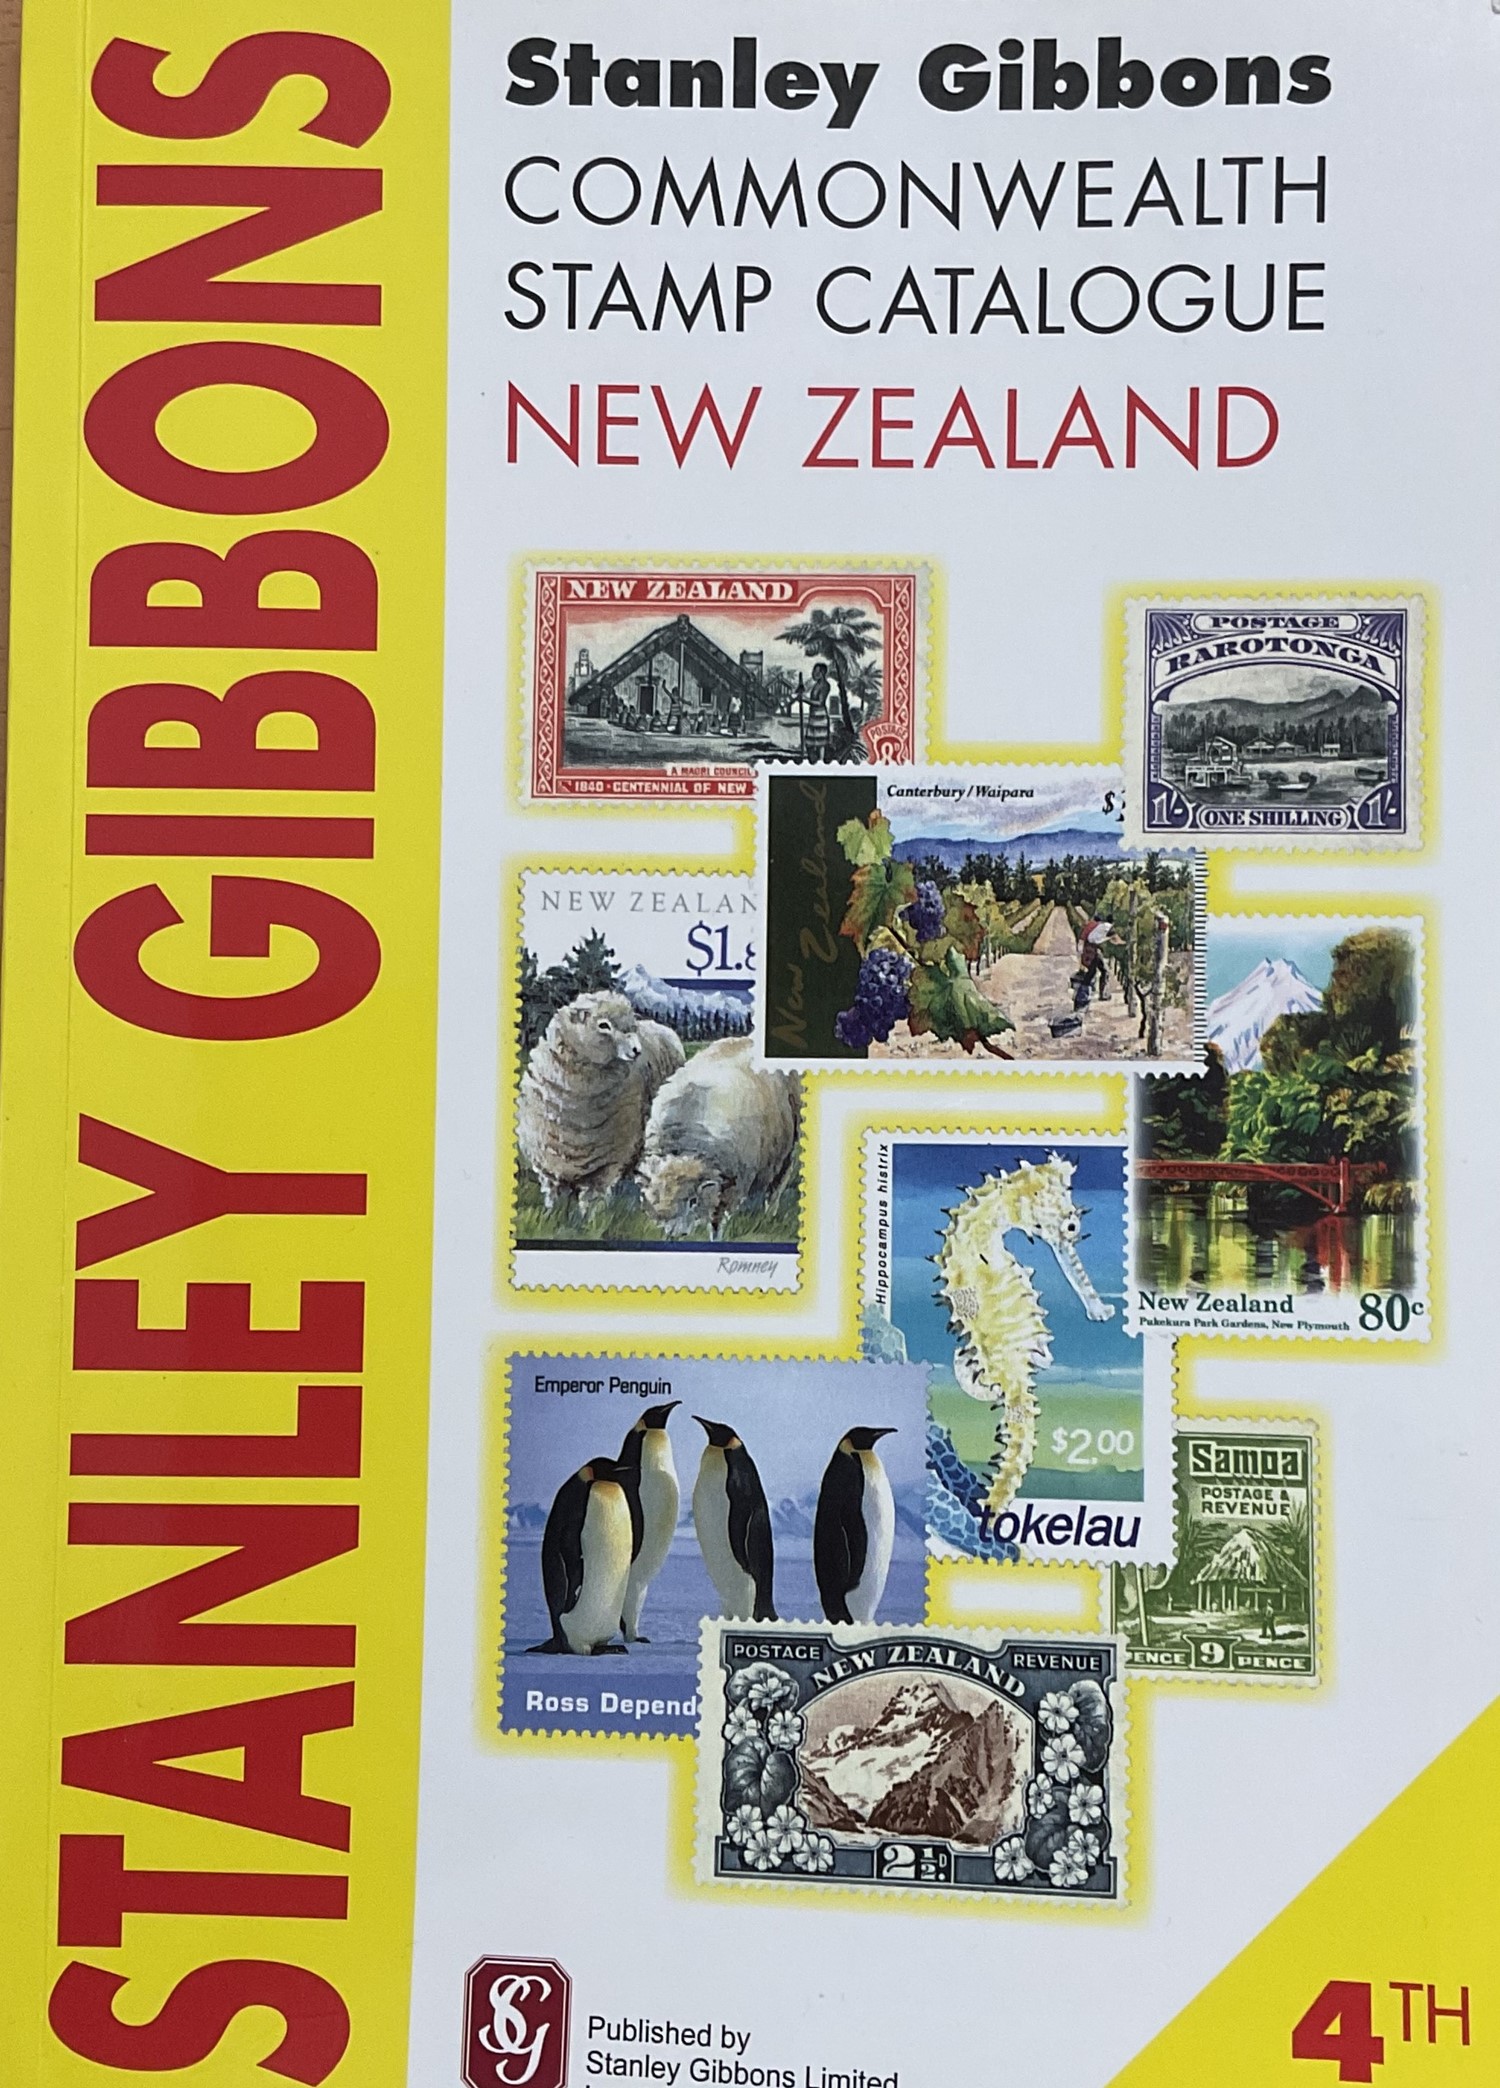 Stanley Gibbons New Zealand Commonwealth stamp catalogue 4th edition. We combine postage on multiple